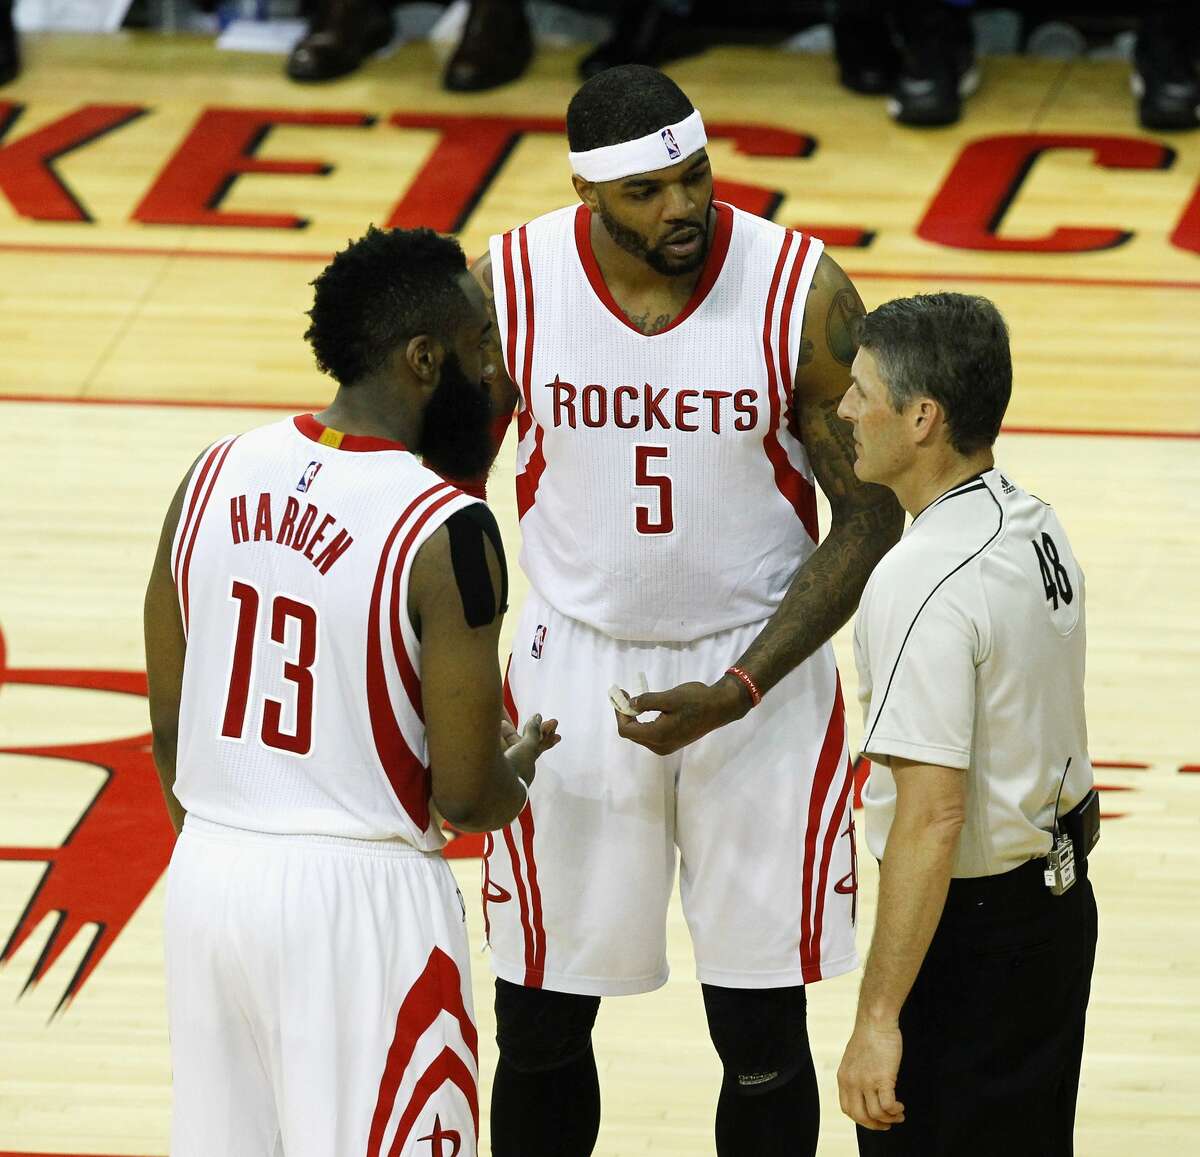 HOUSTON, TX - MAY 23: James Harden #13 of the Houston Rockets and Josh Smith #5 have words with referee Scott Foster during Game Three of the Western Conference Finals at Toyota Center on May 23, 2015 in Houston, Texas. NOTE TO USER: User expressly acknowledges and agrees that, by downloading and/or using this photograph, user is consenting to the terms and conditions of the Getty Images License Agreement. (Photo by Bob Levey/Getty Images)